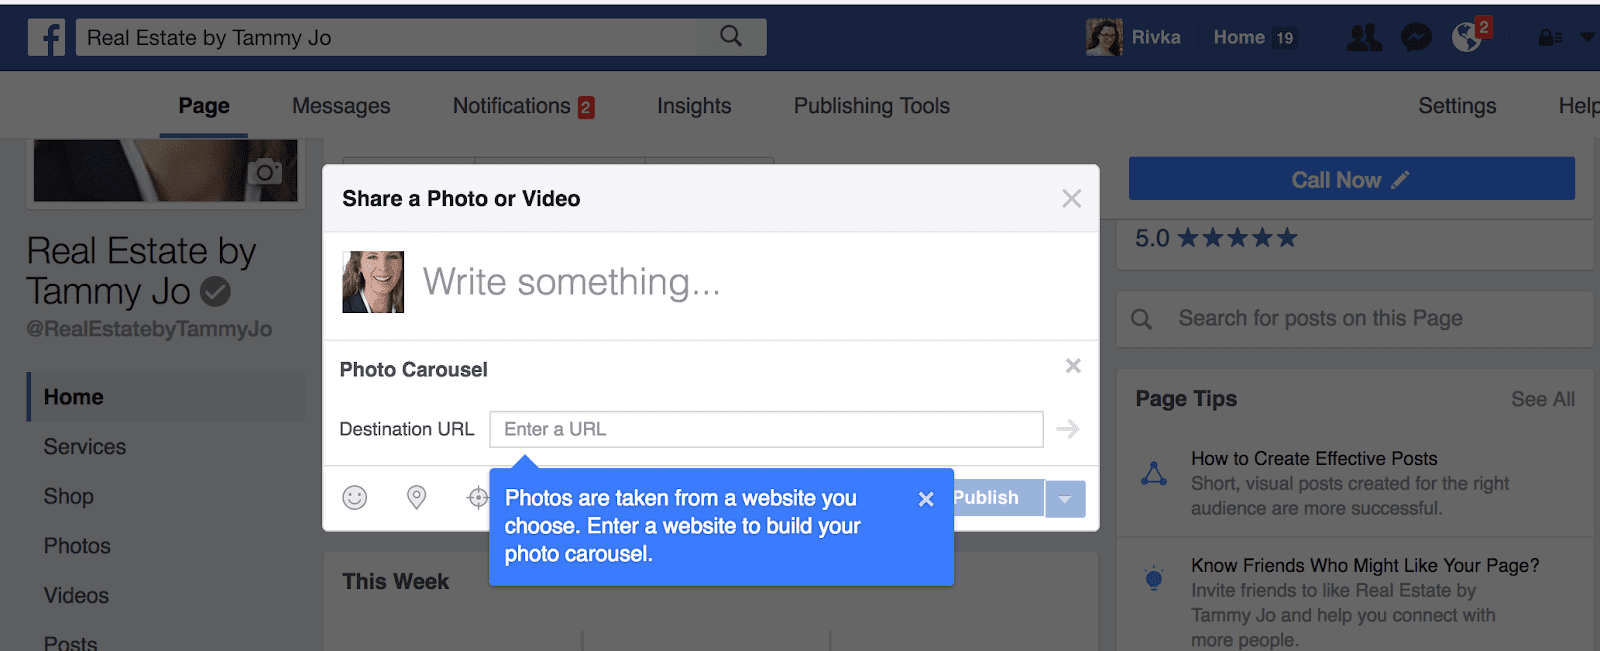 Here's How to Use The New Facebook Post Options | Agorapulse